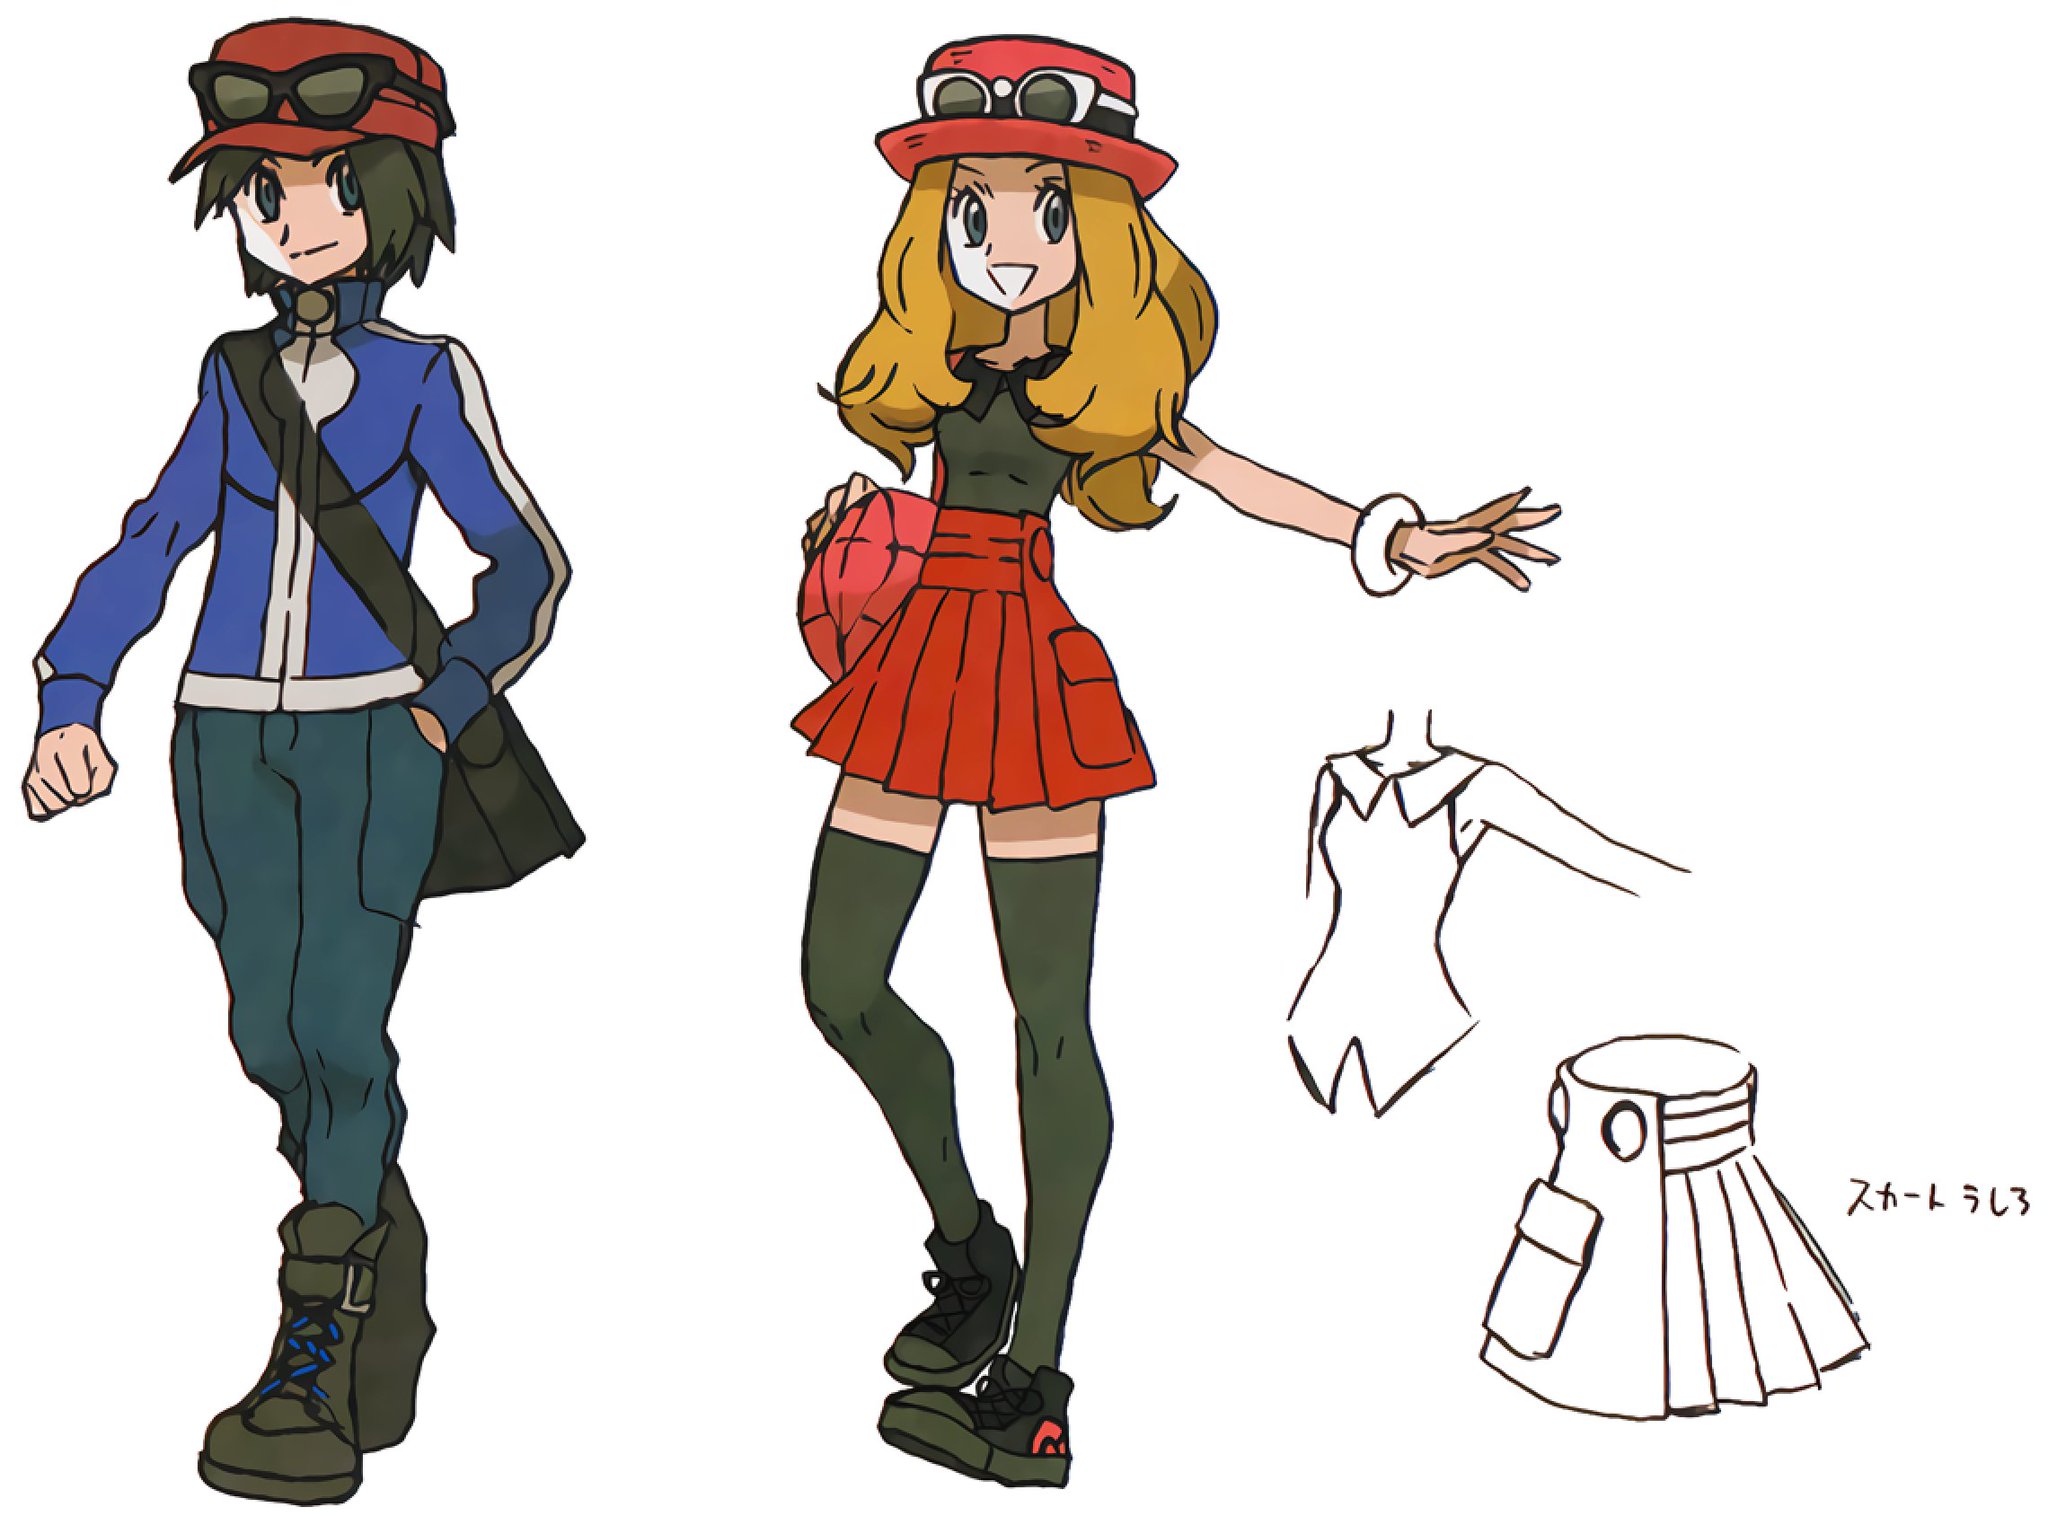 Mixeli on X: Pokémon X and Y - All Concept Art of Starters